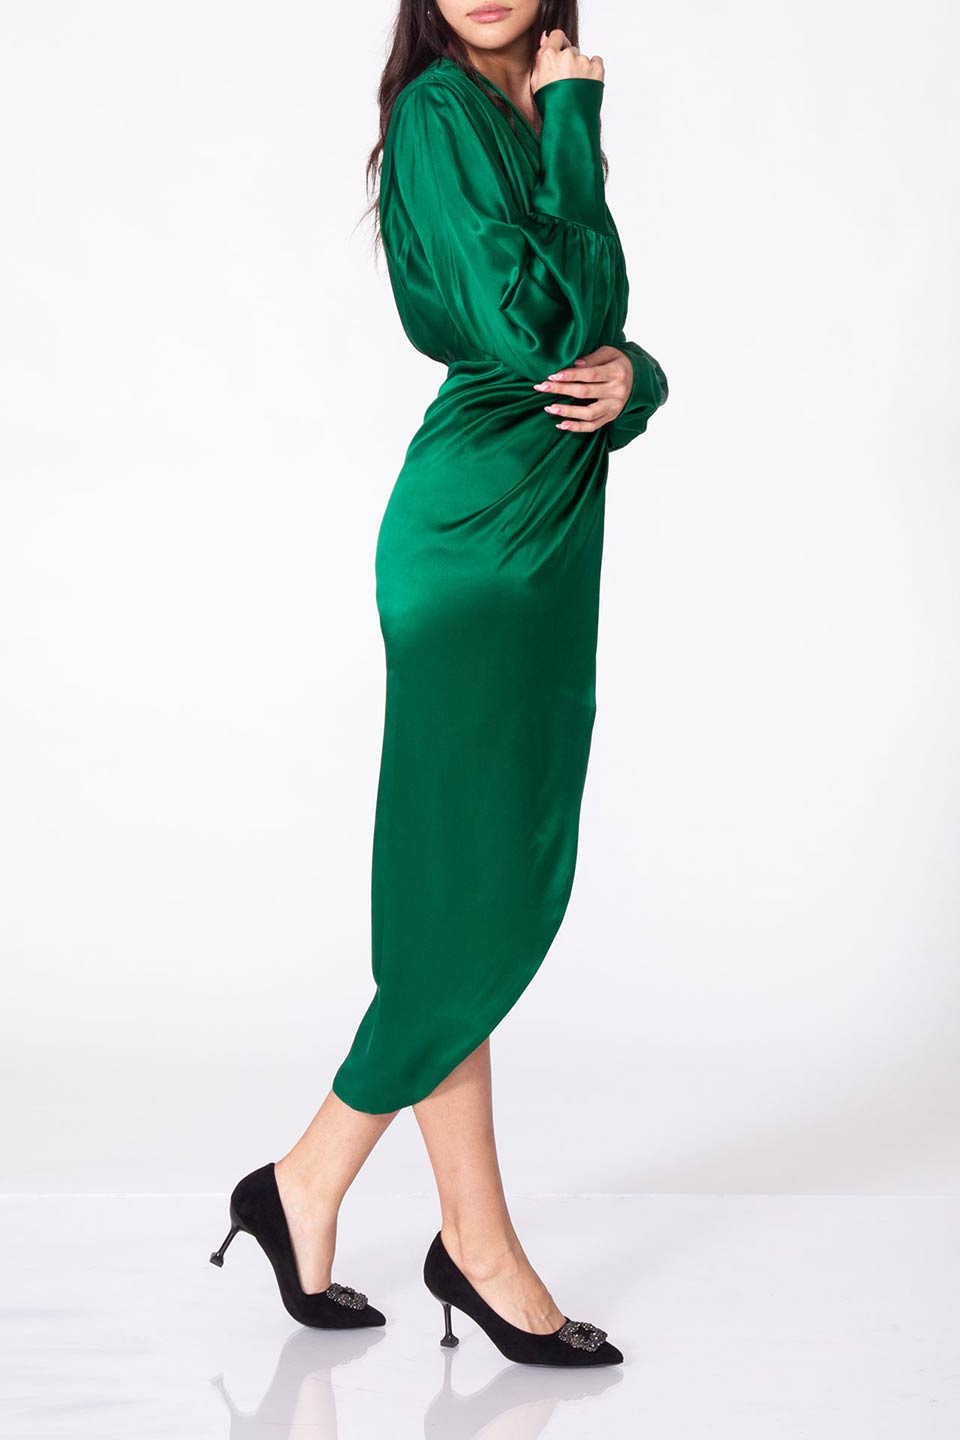 Designer gown in green color to shop online. Emerald green trendy midi dress 